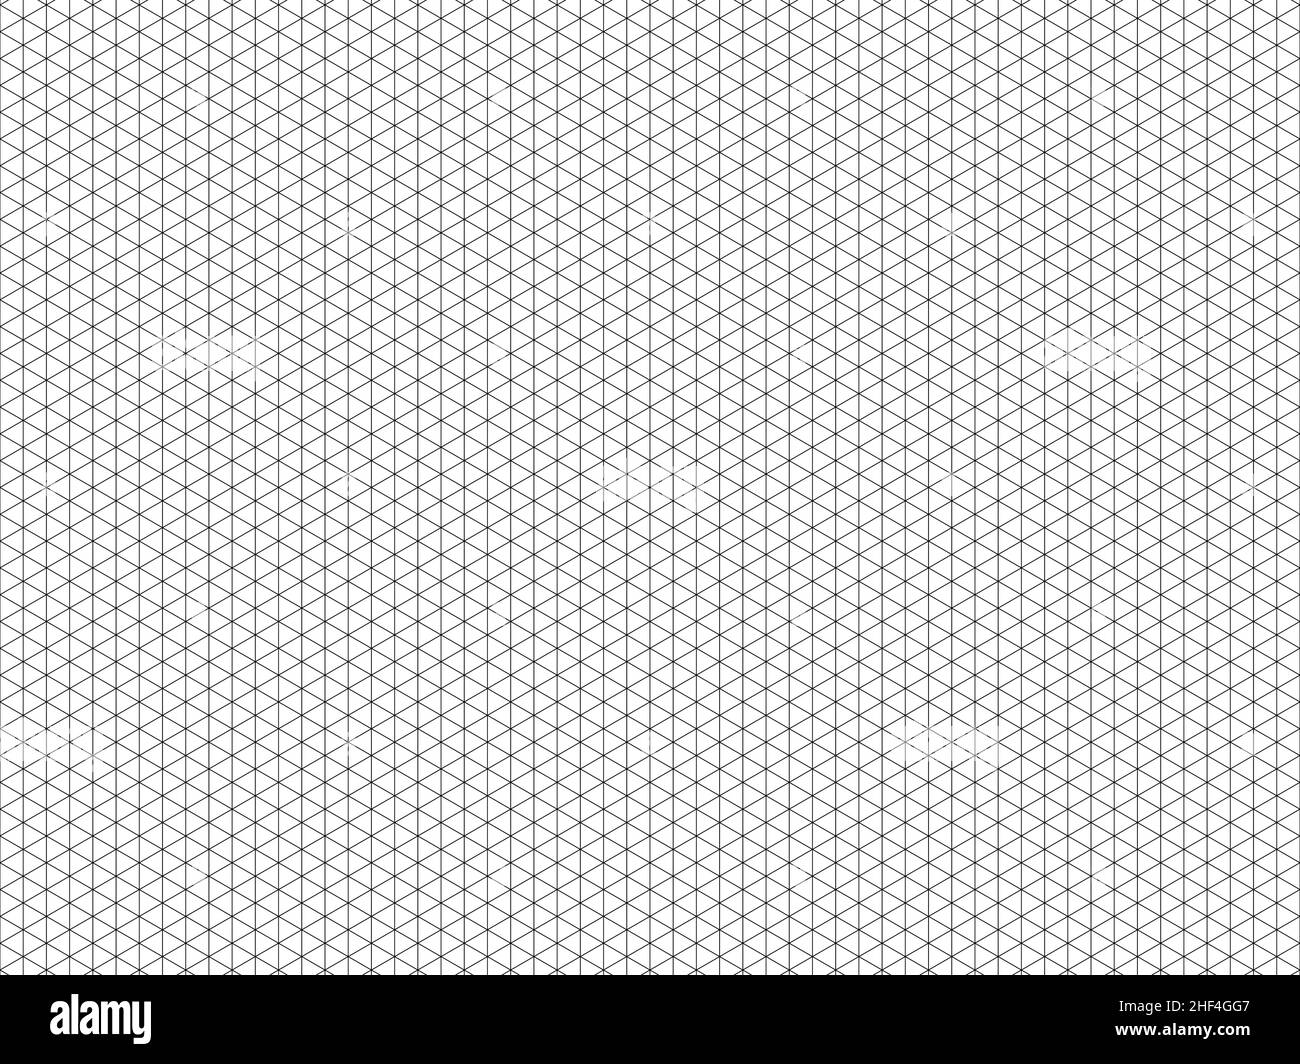 Isometric graph paper grid. Stock Vector